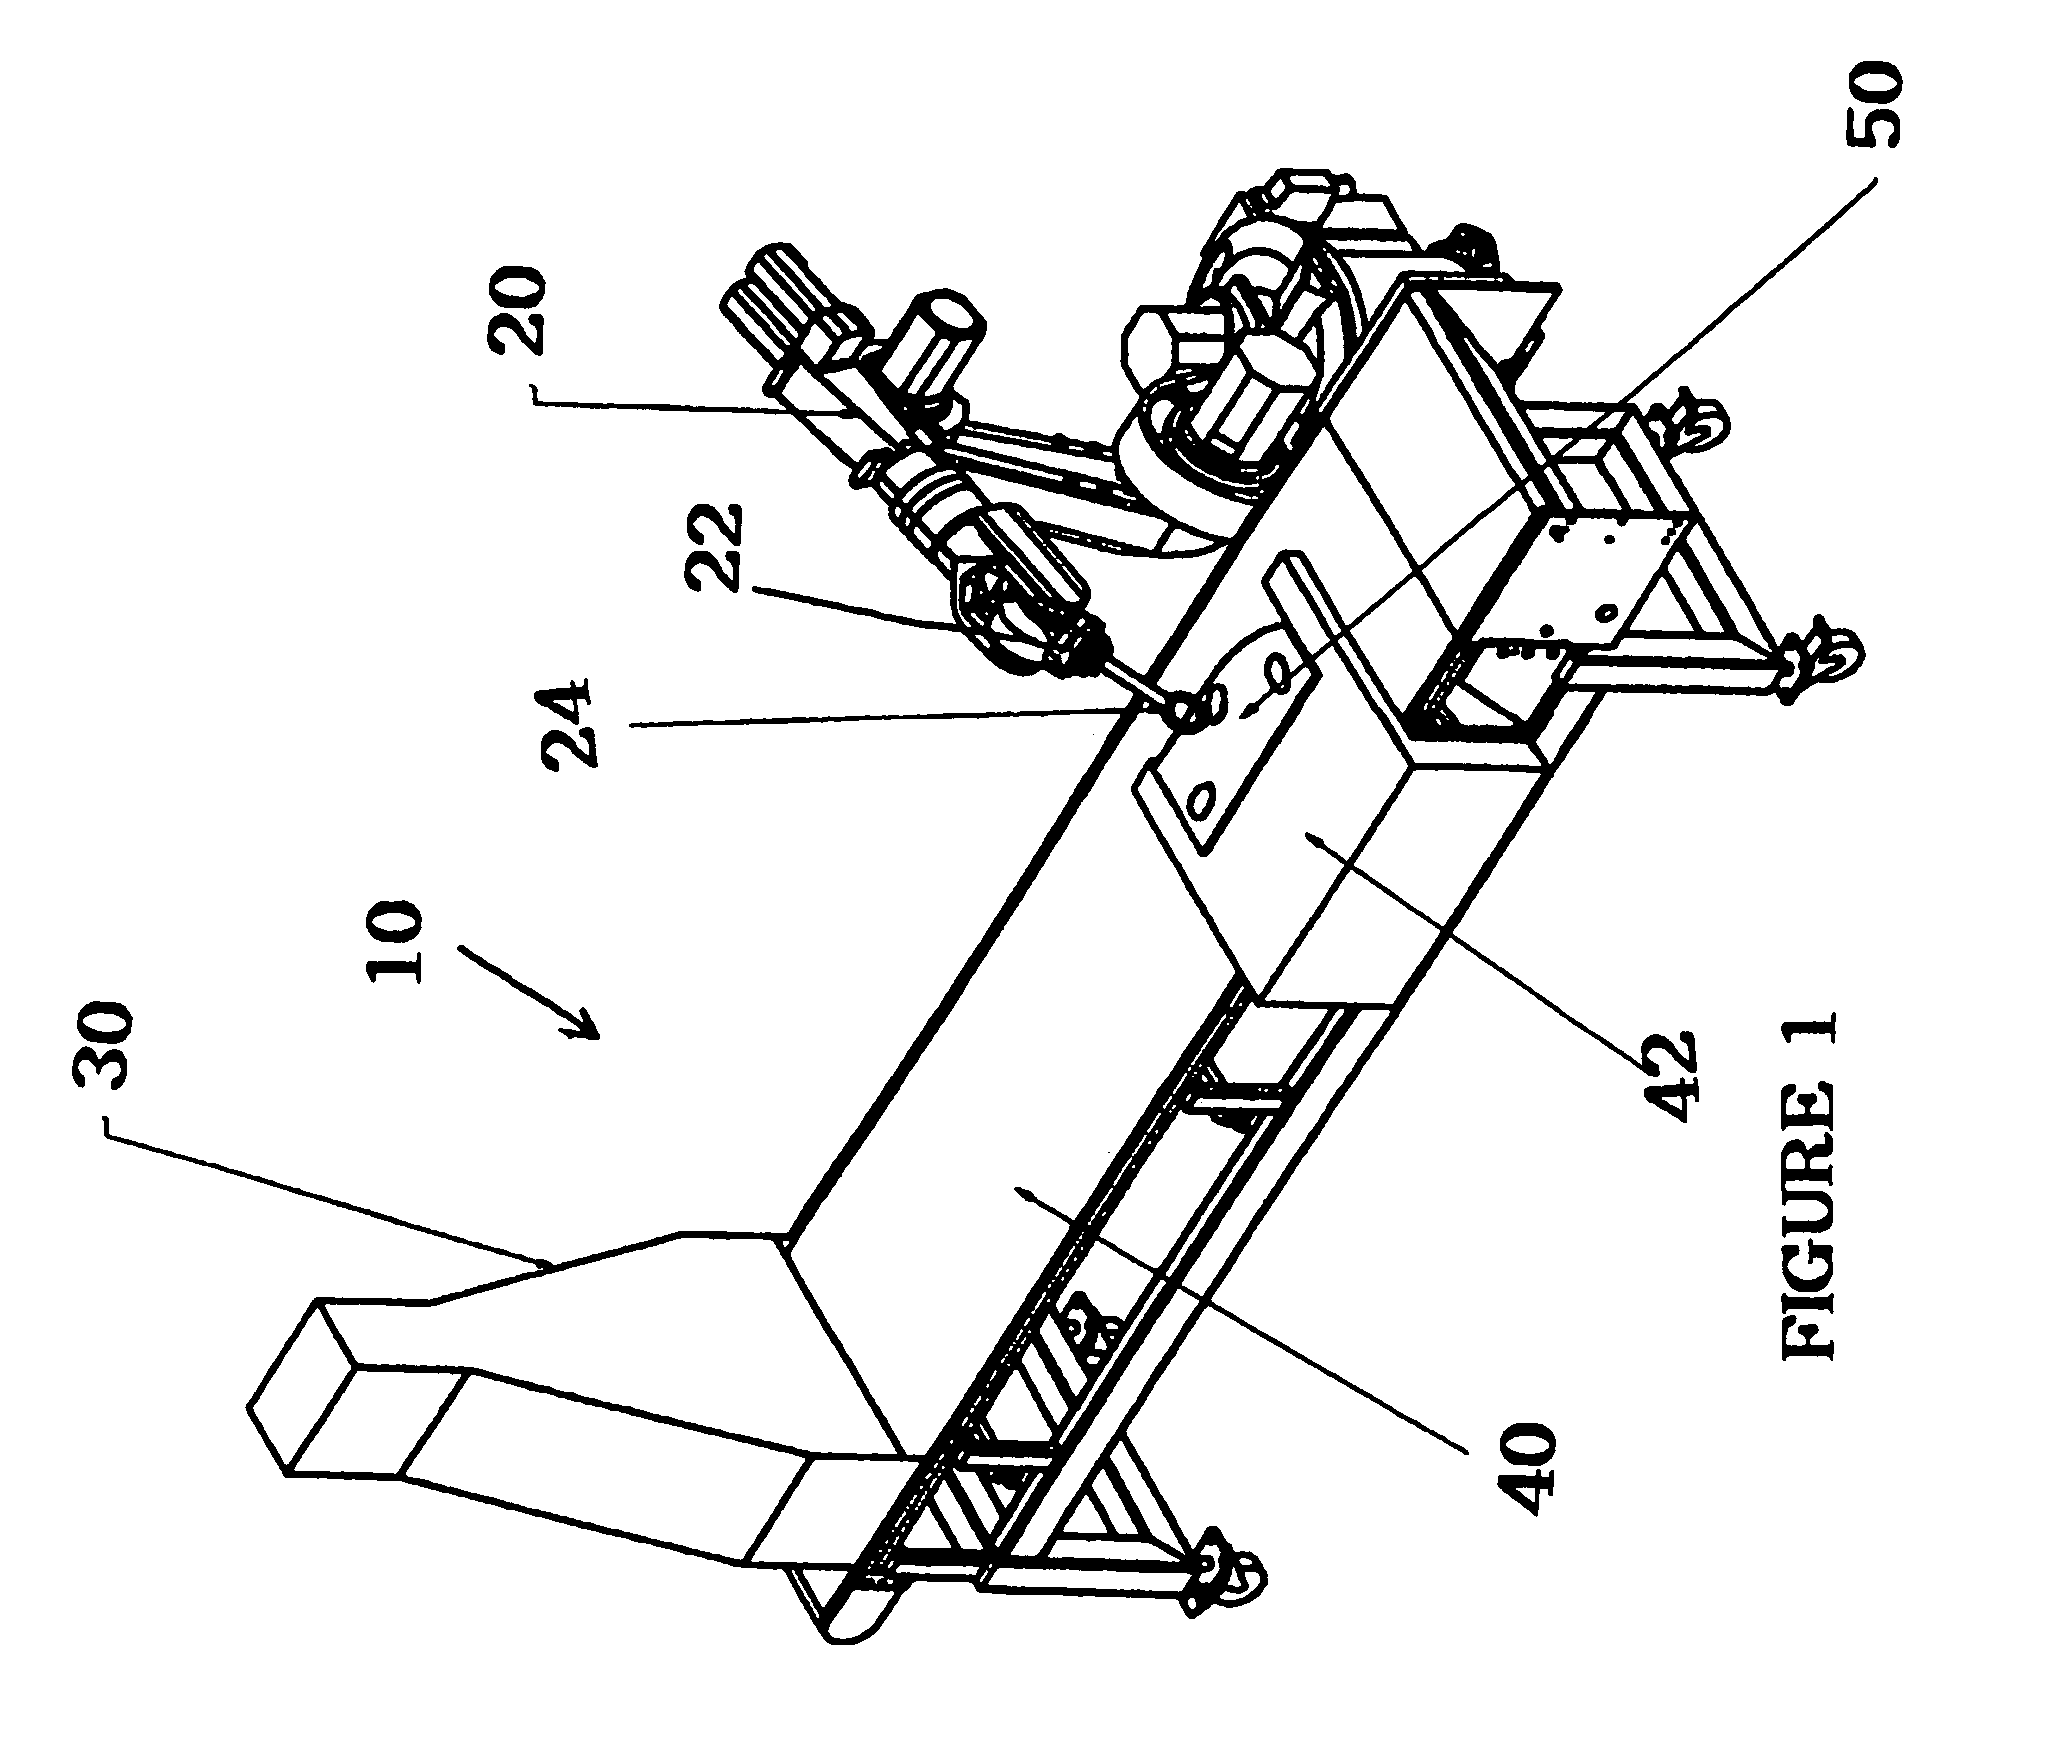 Method for de-rinding and trimming a piece of meat or a piece of slaughtered animal